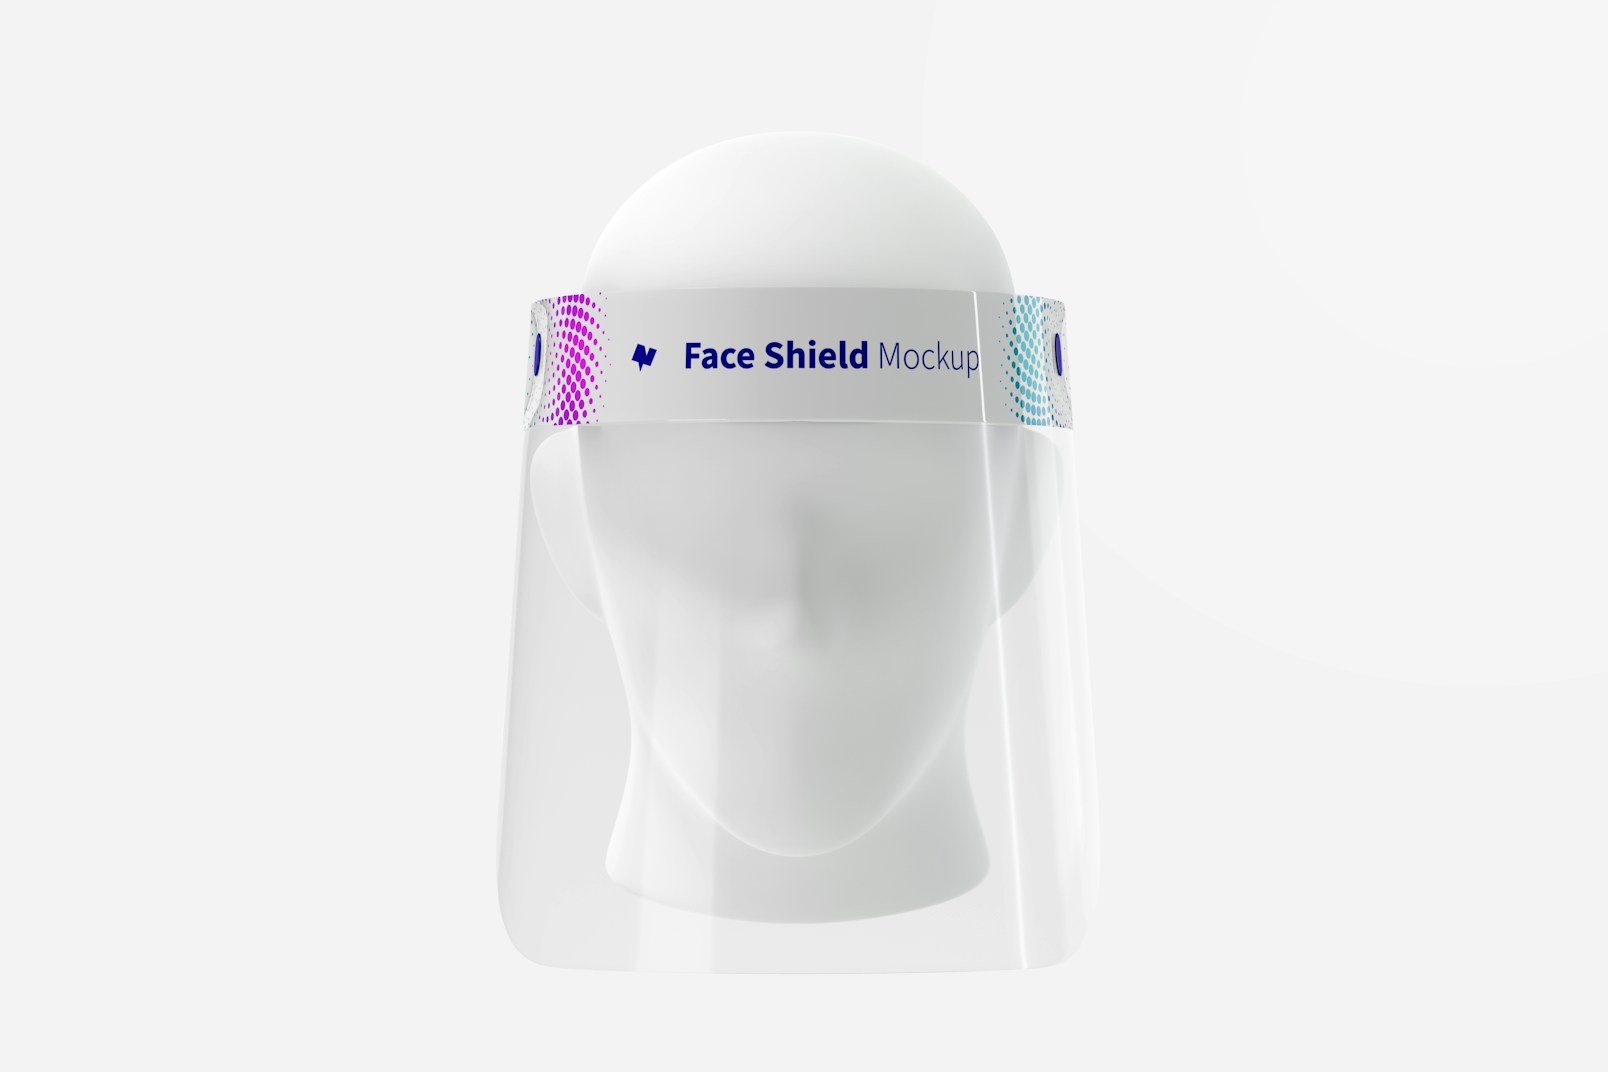 Face Shield with Head Mockup, Front View